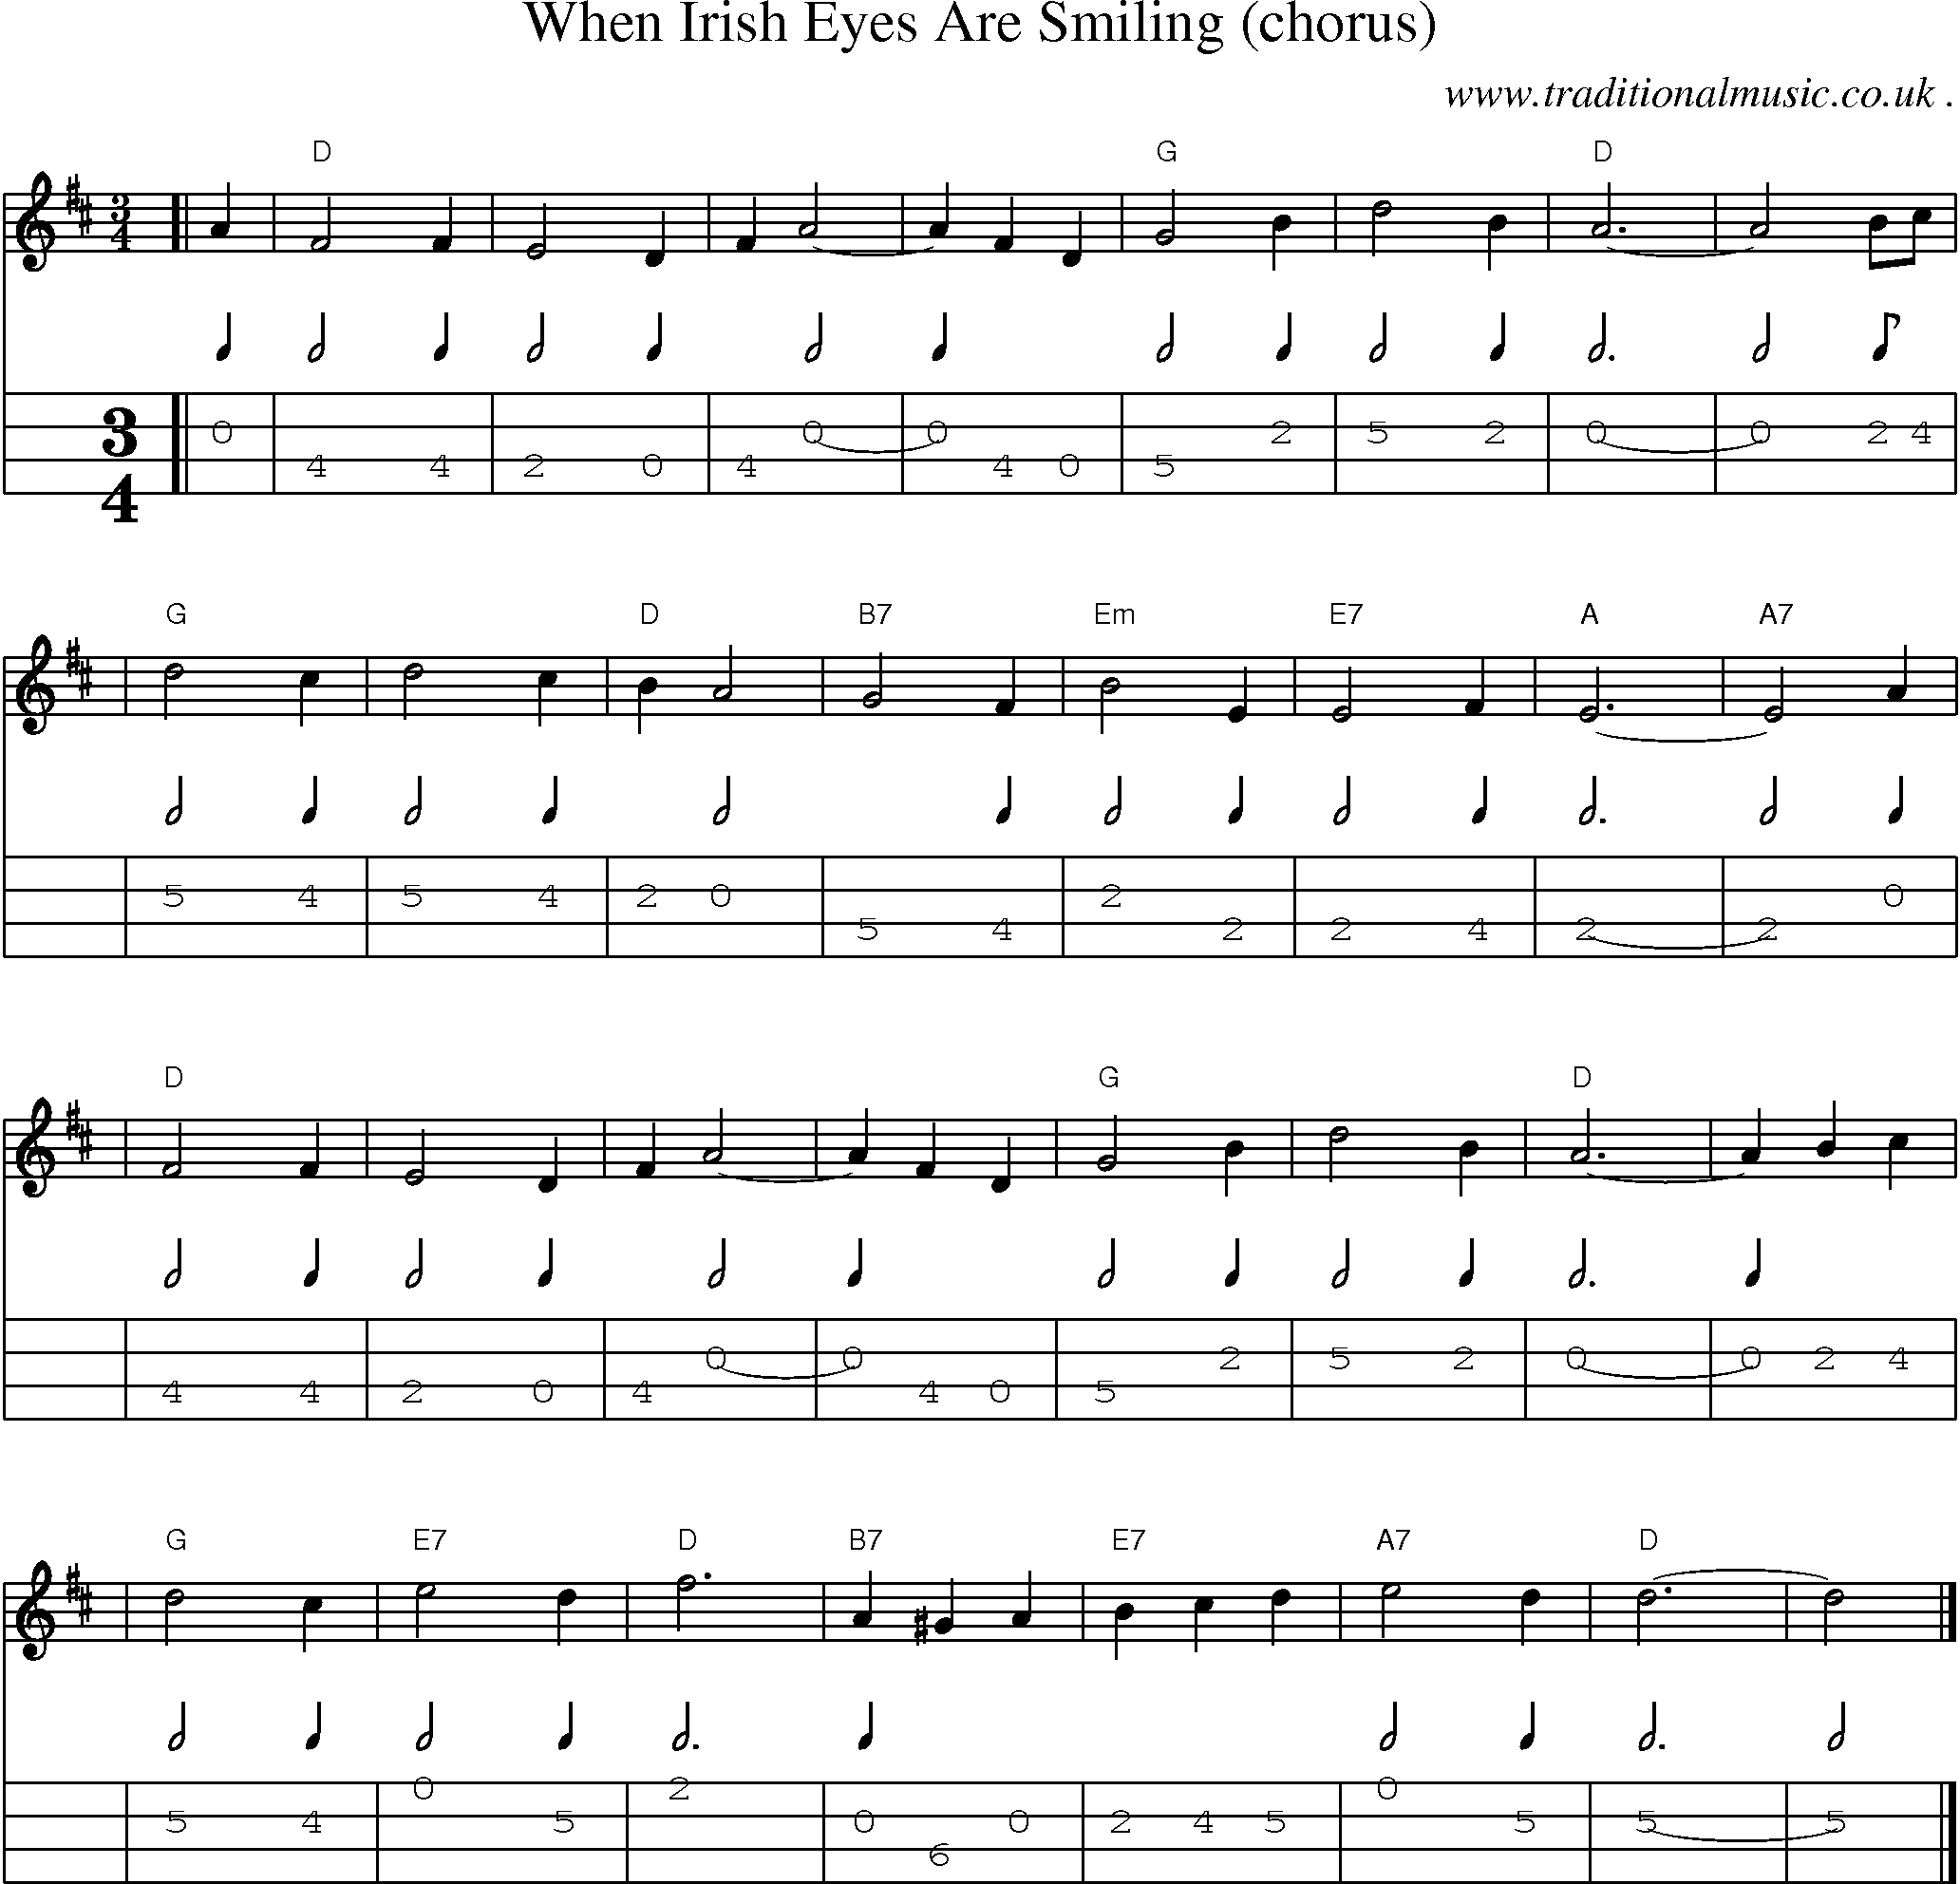 Sheet-music  score, Chords and Mandolin Tabs for When Irish Eyes Are Smiling Chorus